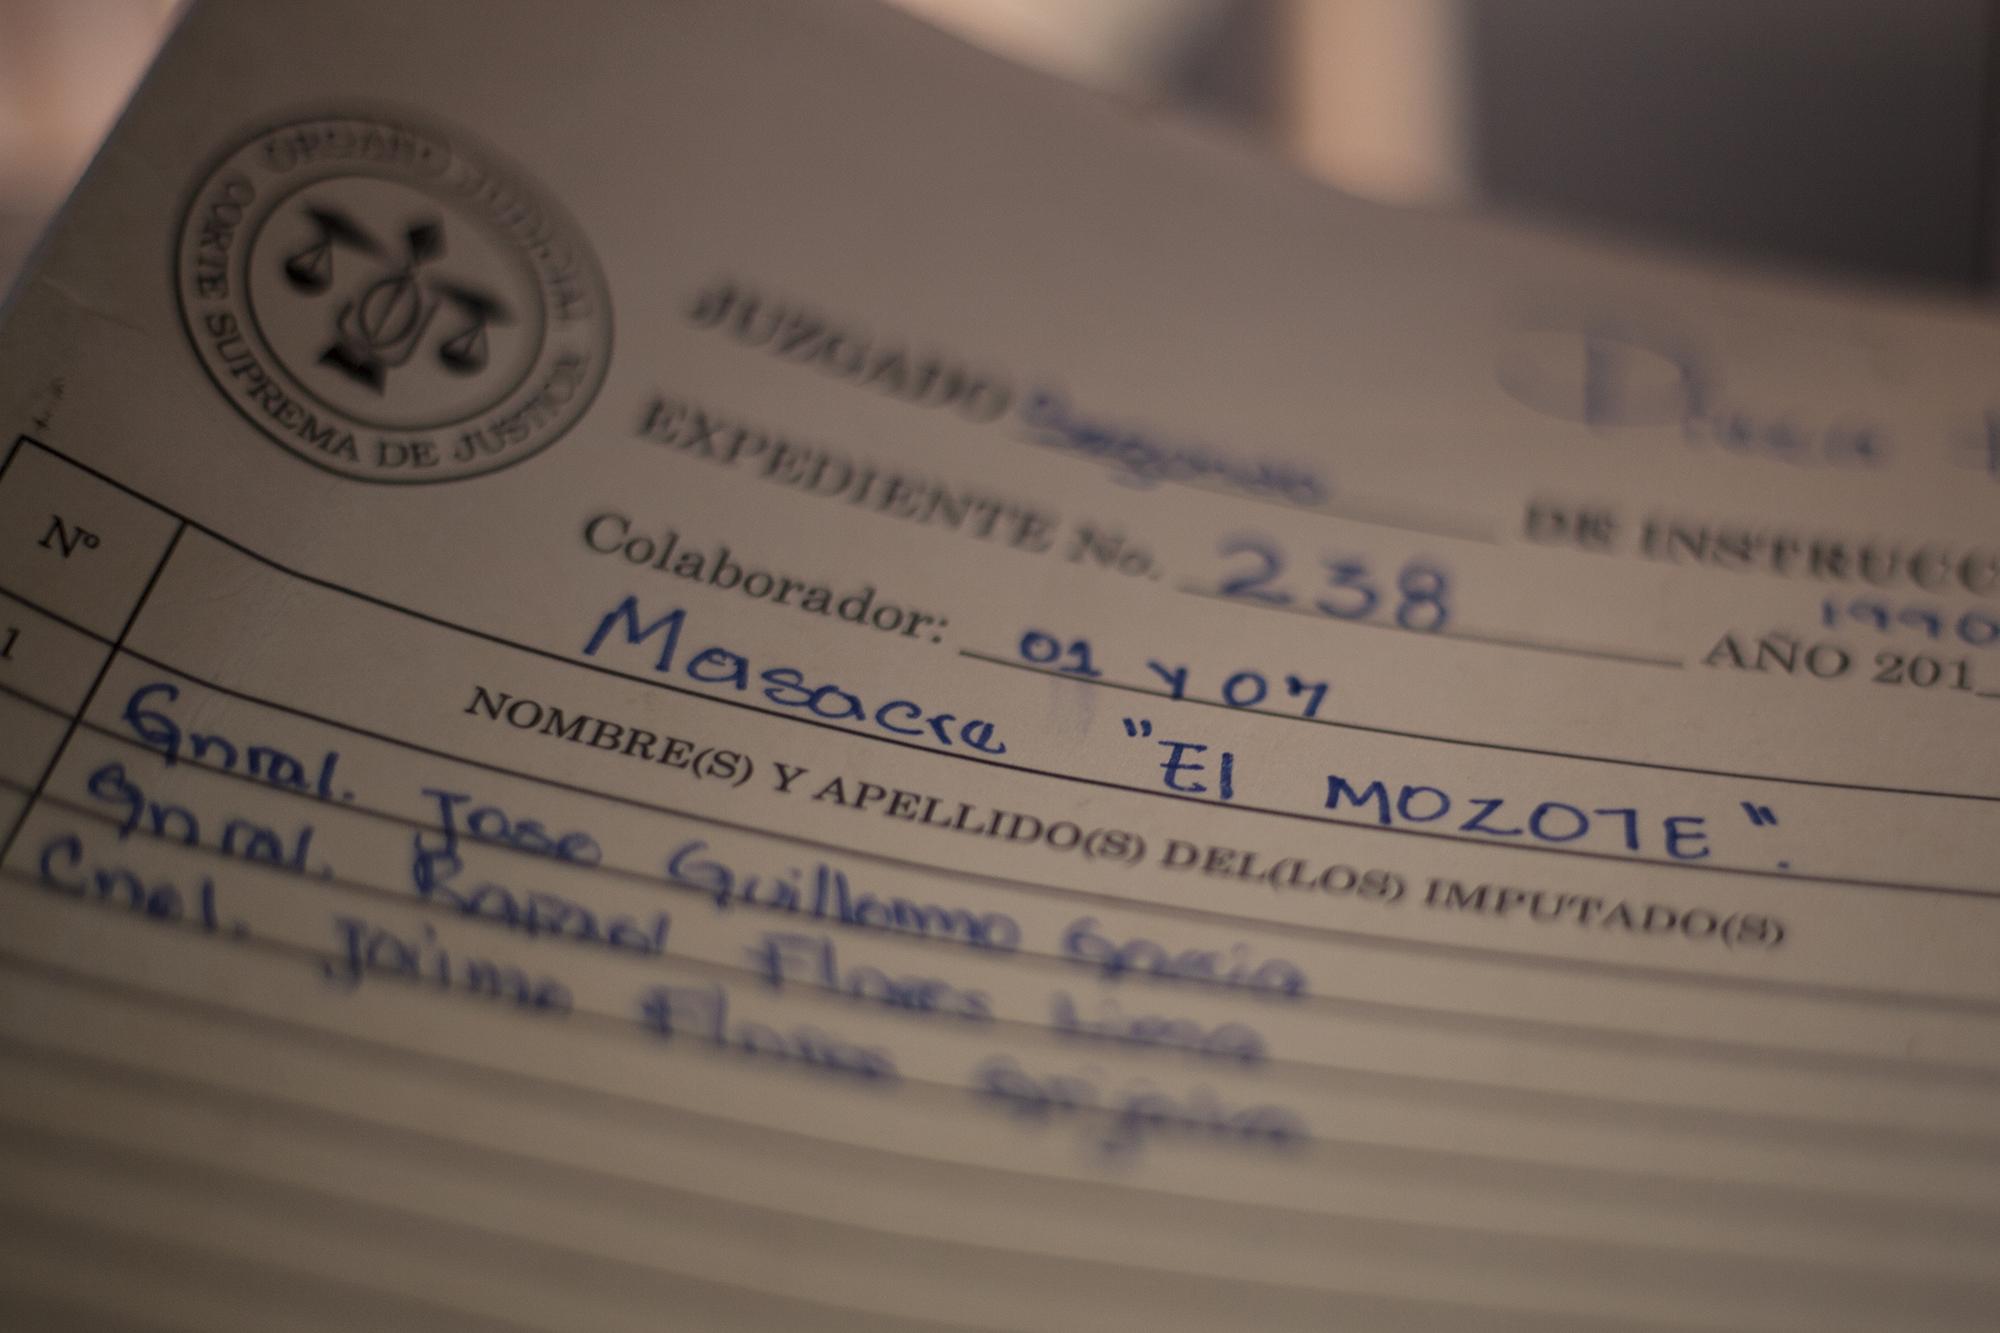 Archives on the Mozote massacre, in the San Francisco Gotera courthouse. Photo by El Faro